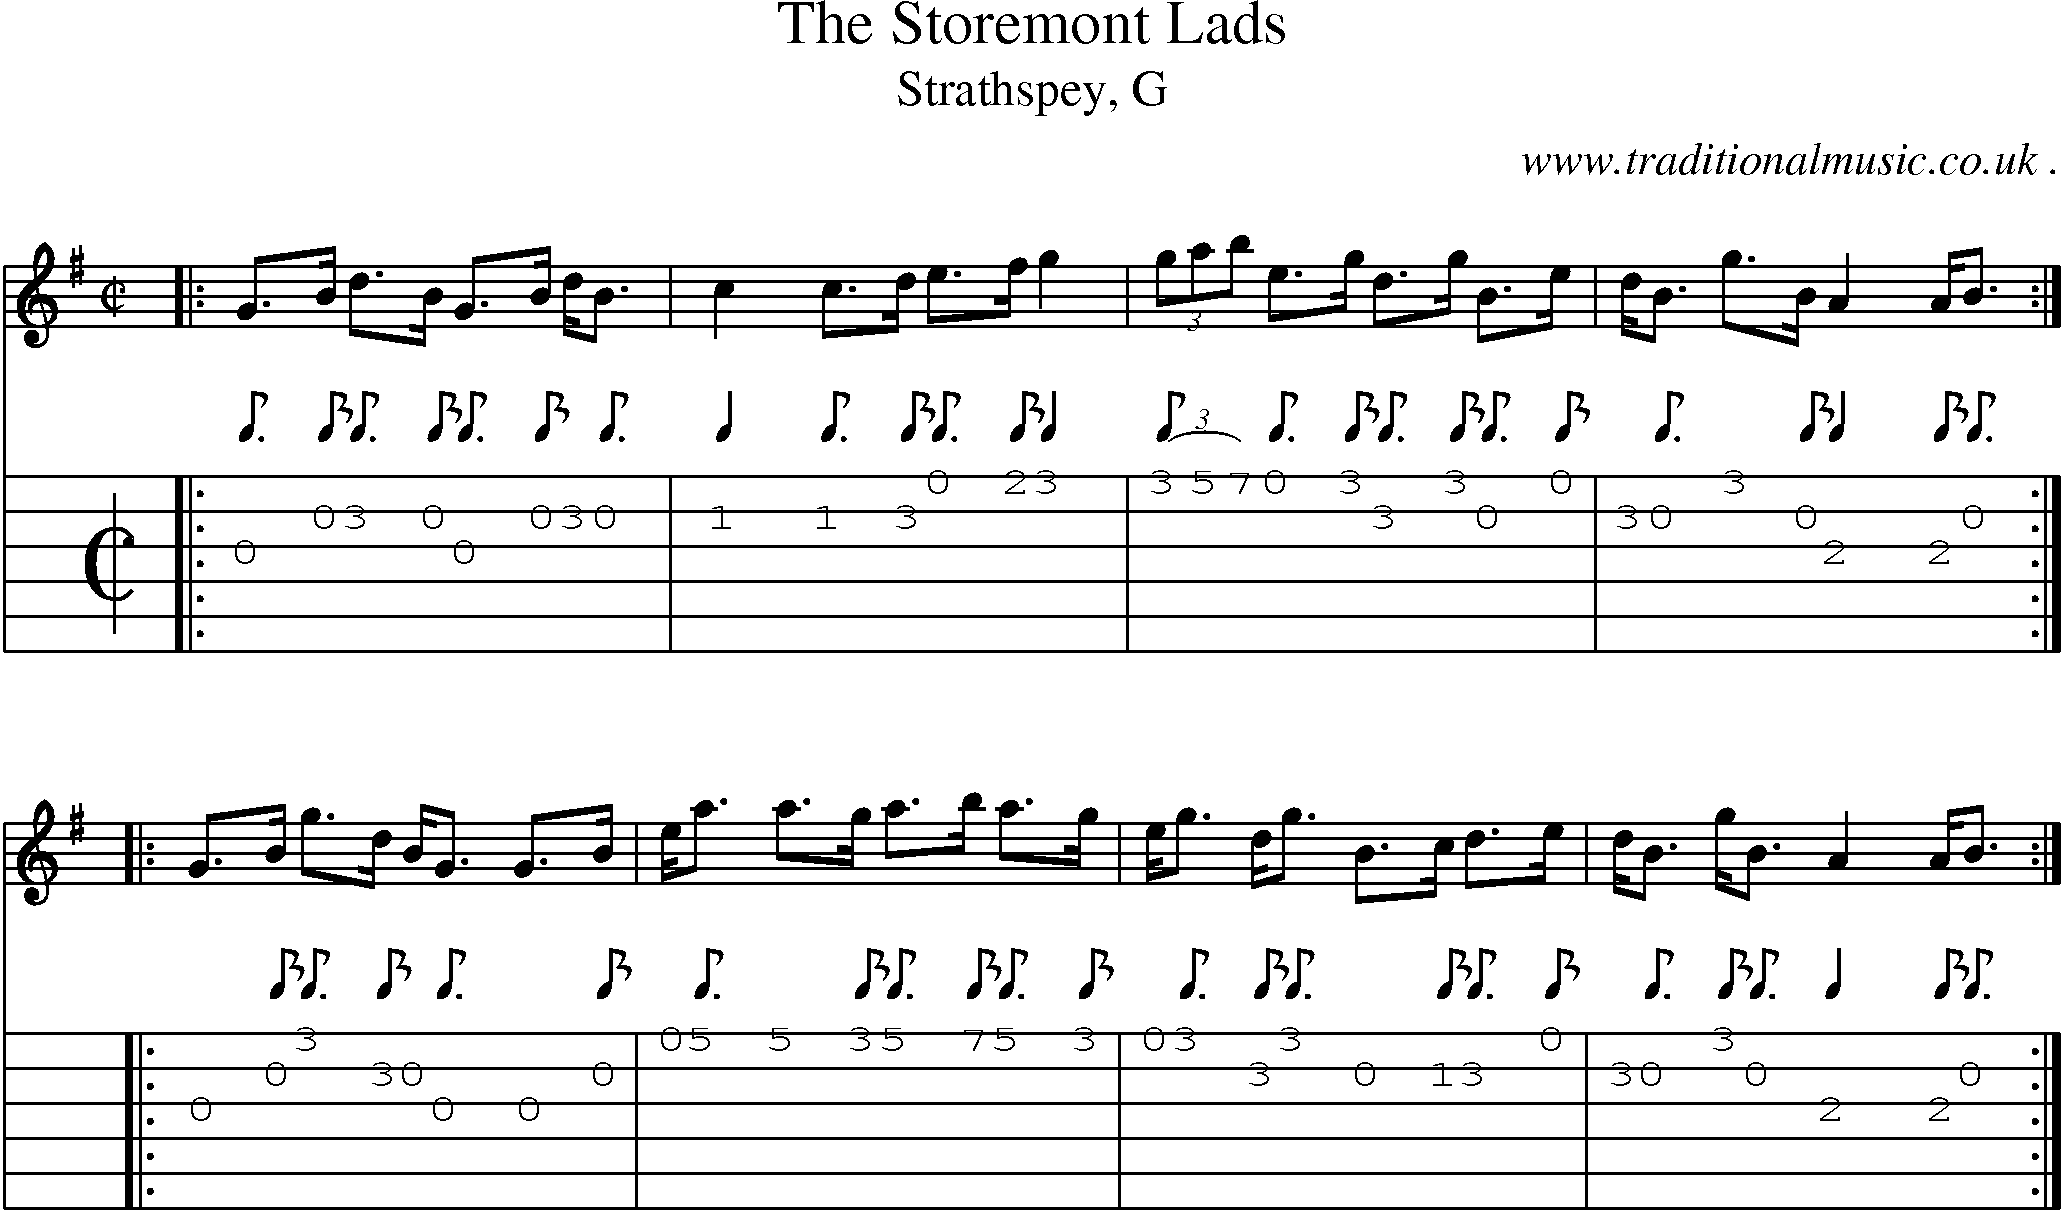 Sheet-music  score, Chords and Guitar Tabs for The Storemont Lads